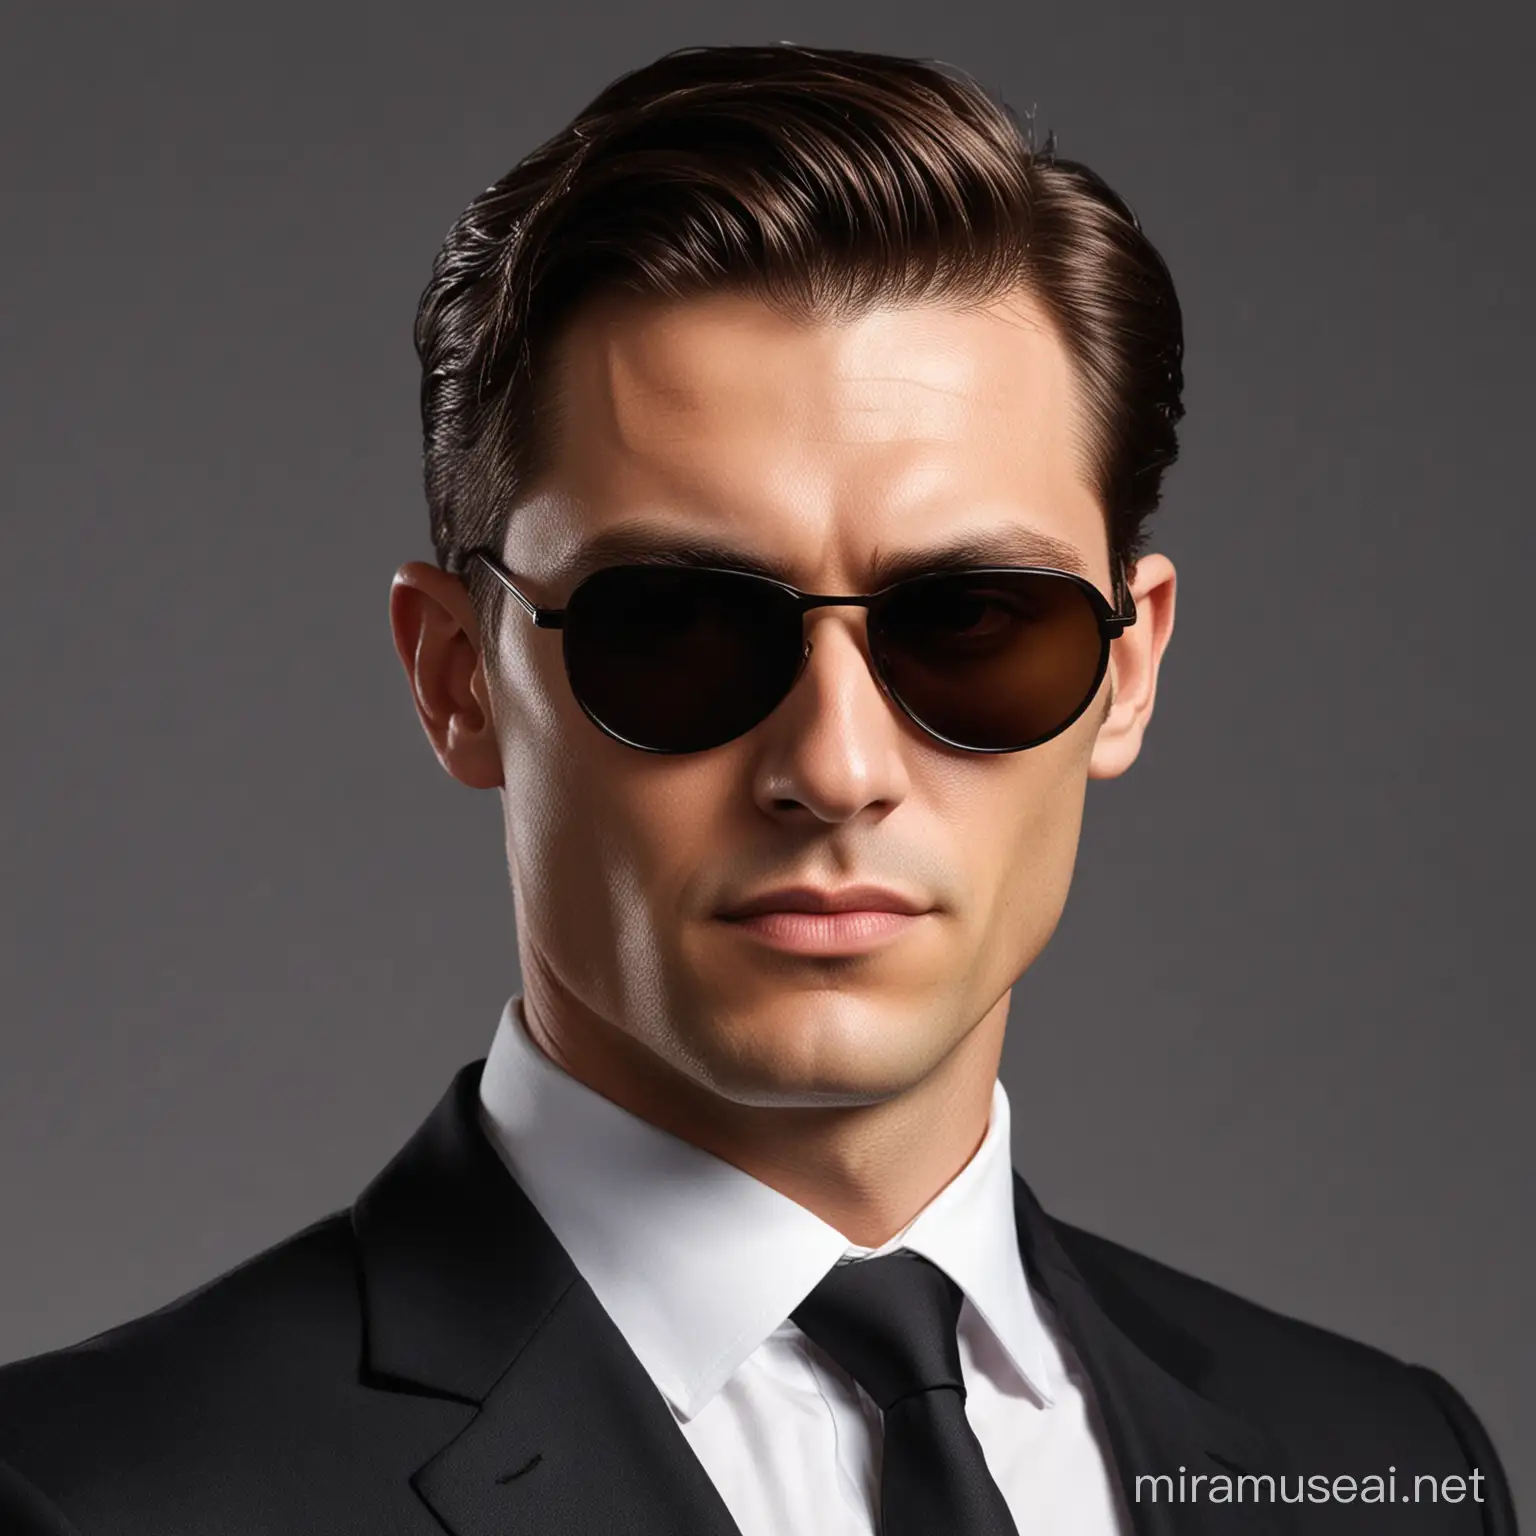 A secret agent with brown greased side parting hair, a black suit, black sunglasses,
portrait